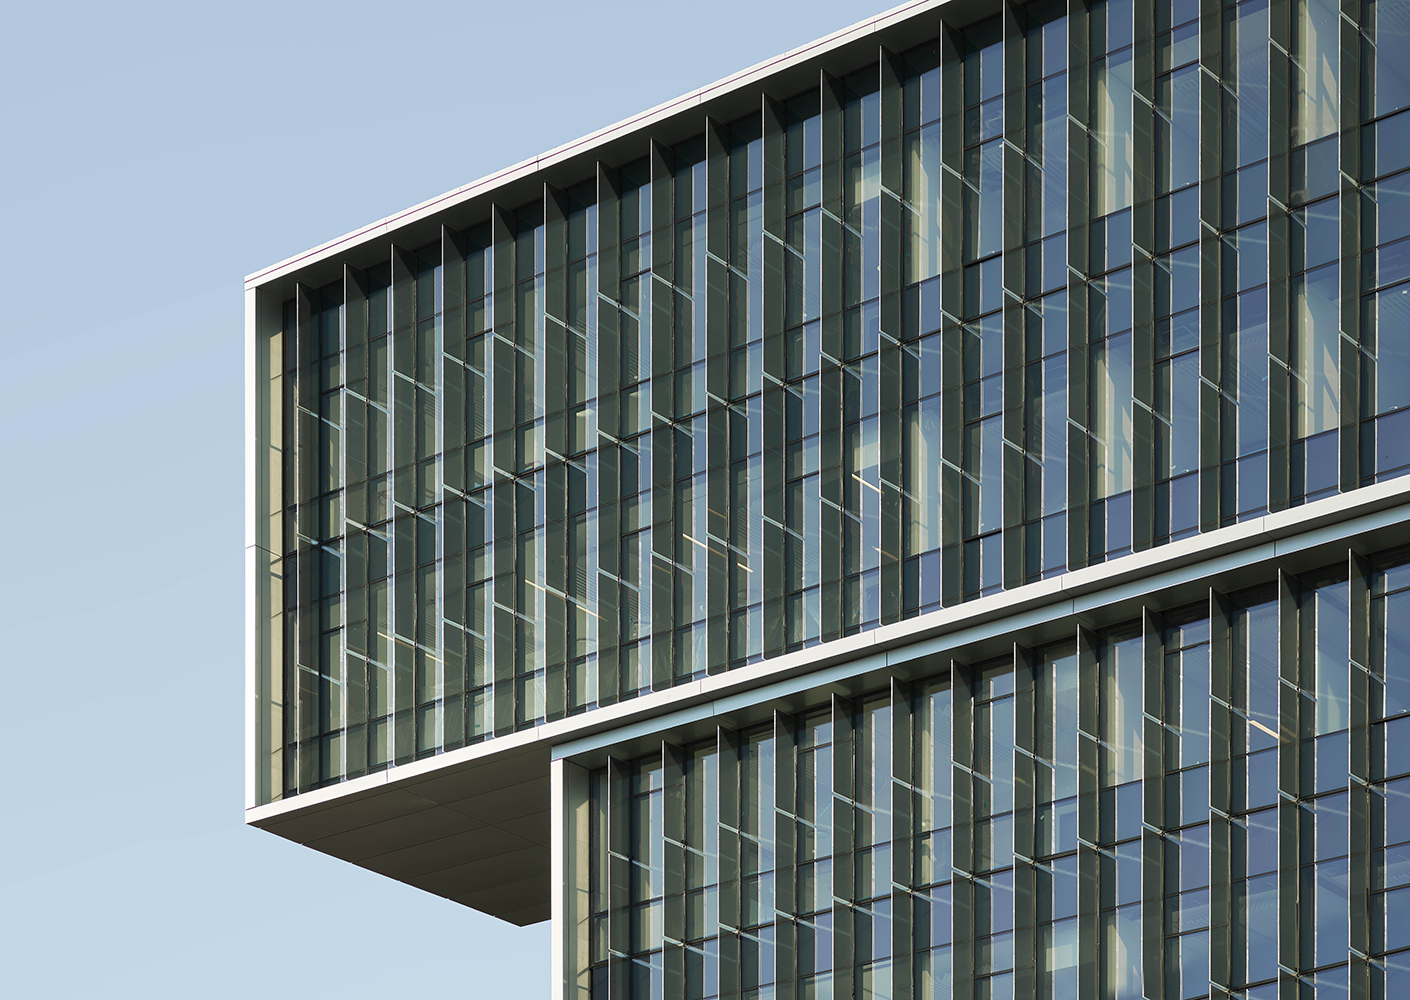 Close up view of the solar glass fins on the south facade of the Life Sciences Building